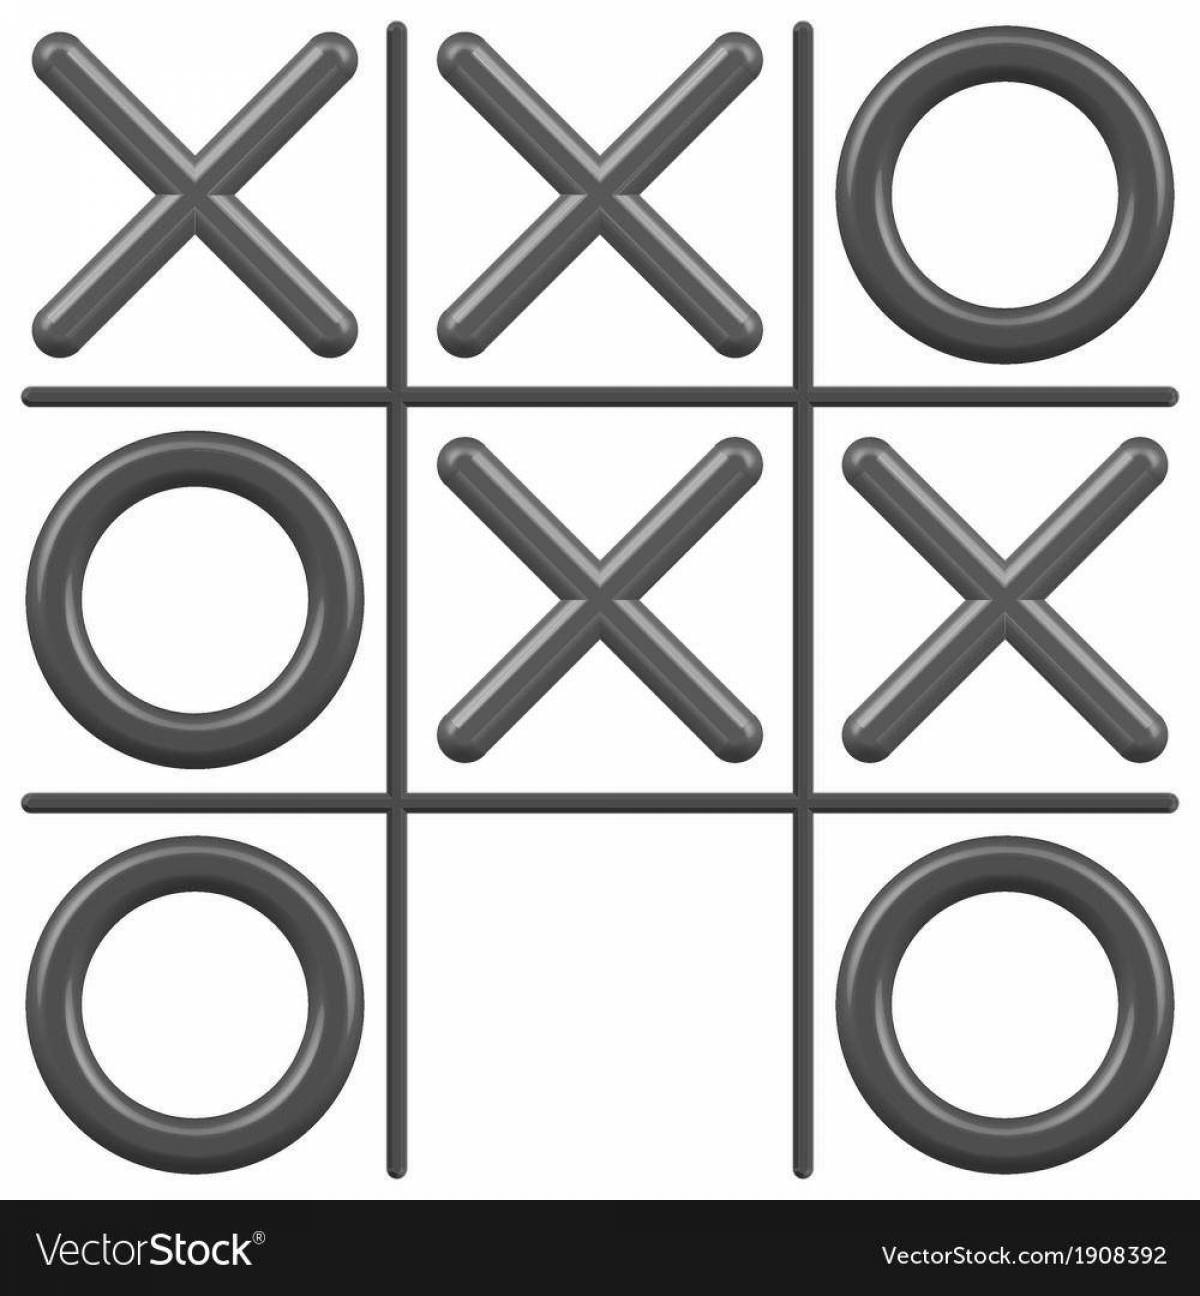 Tic-tac-toe creative coloring page